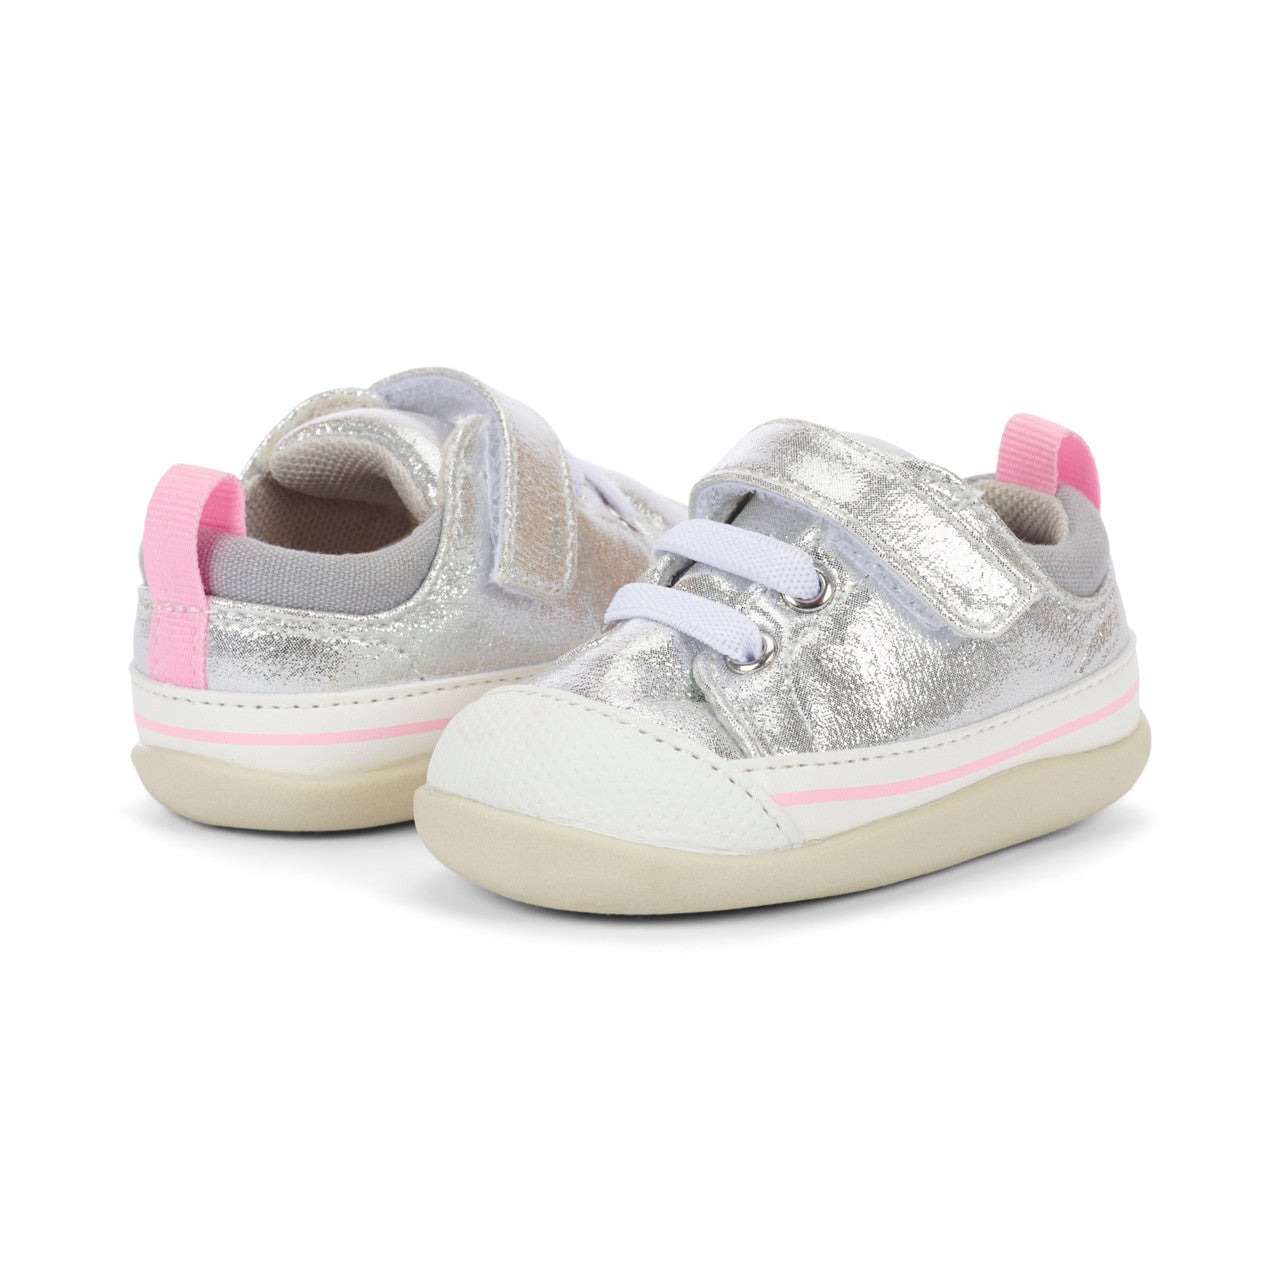 Kids & Baby Boutique Shoes